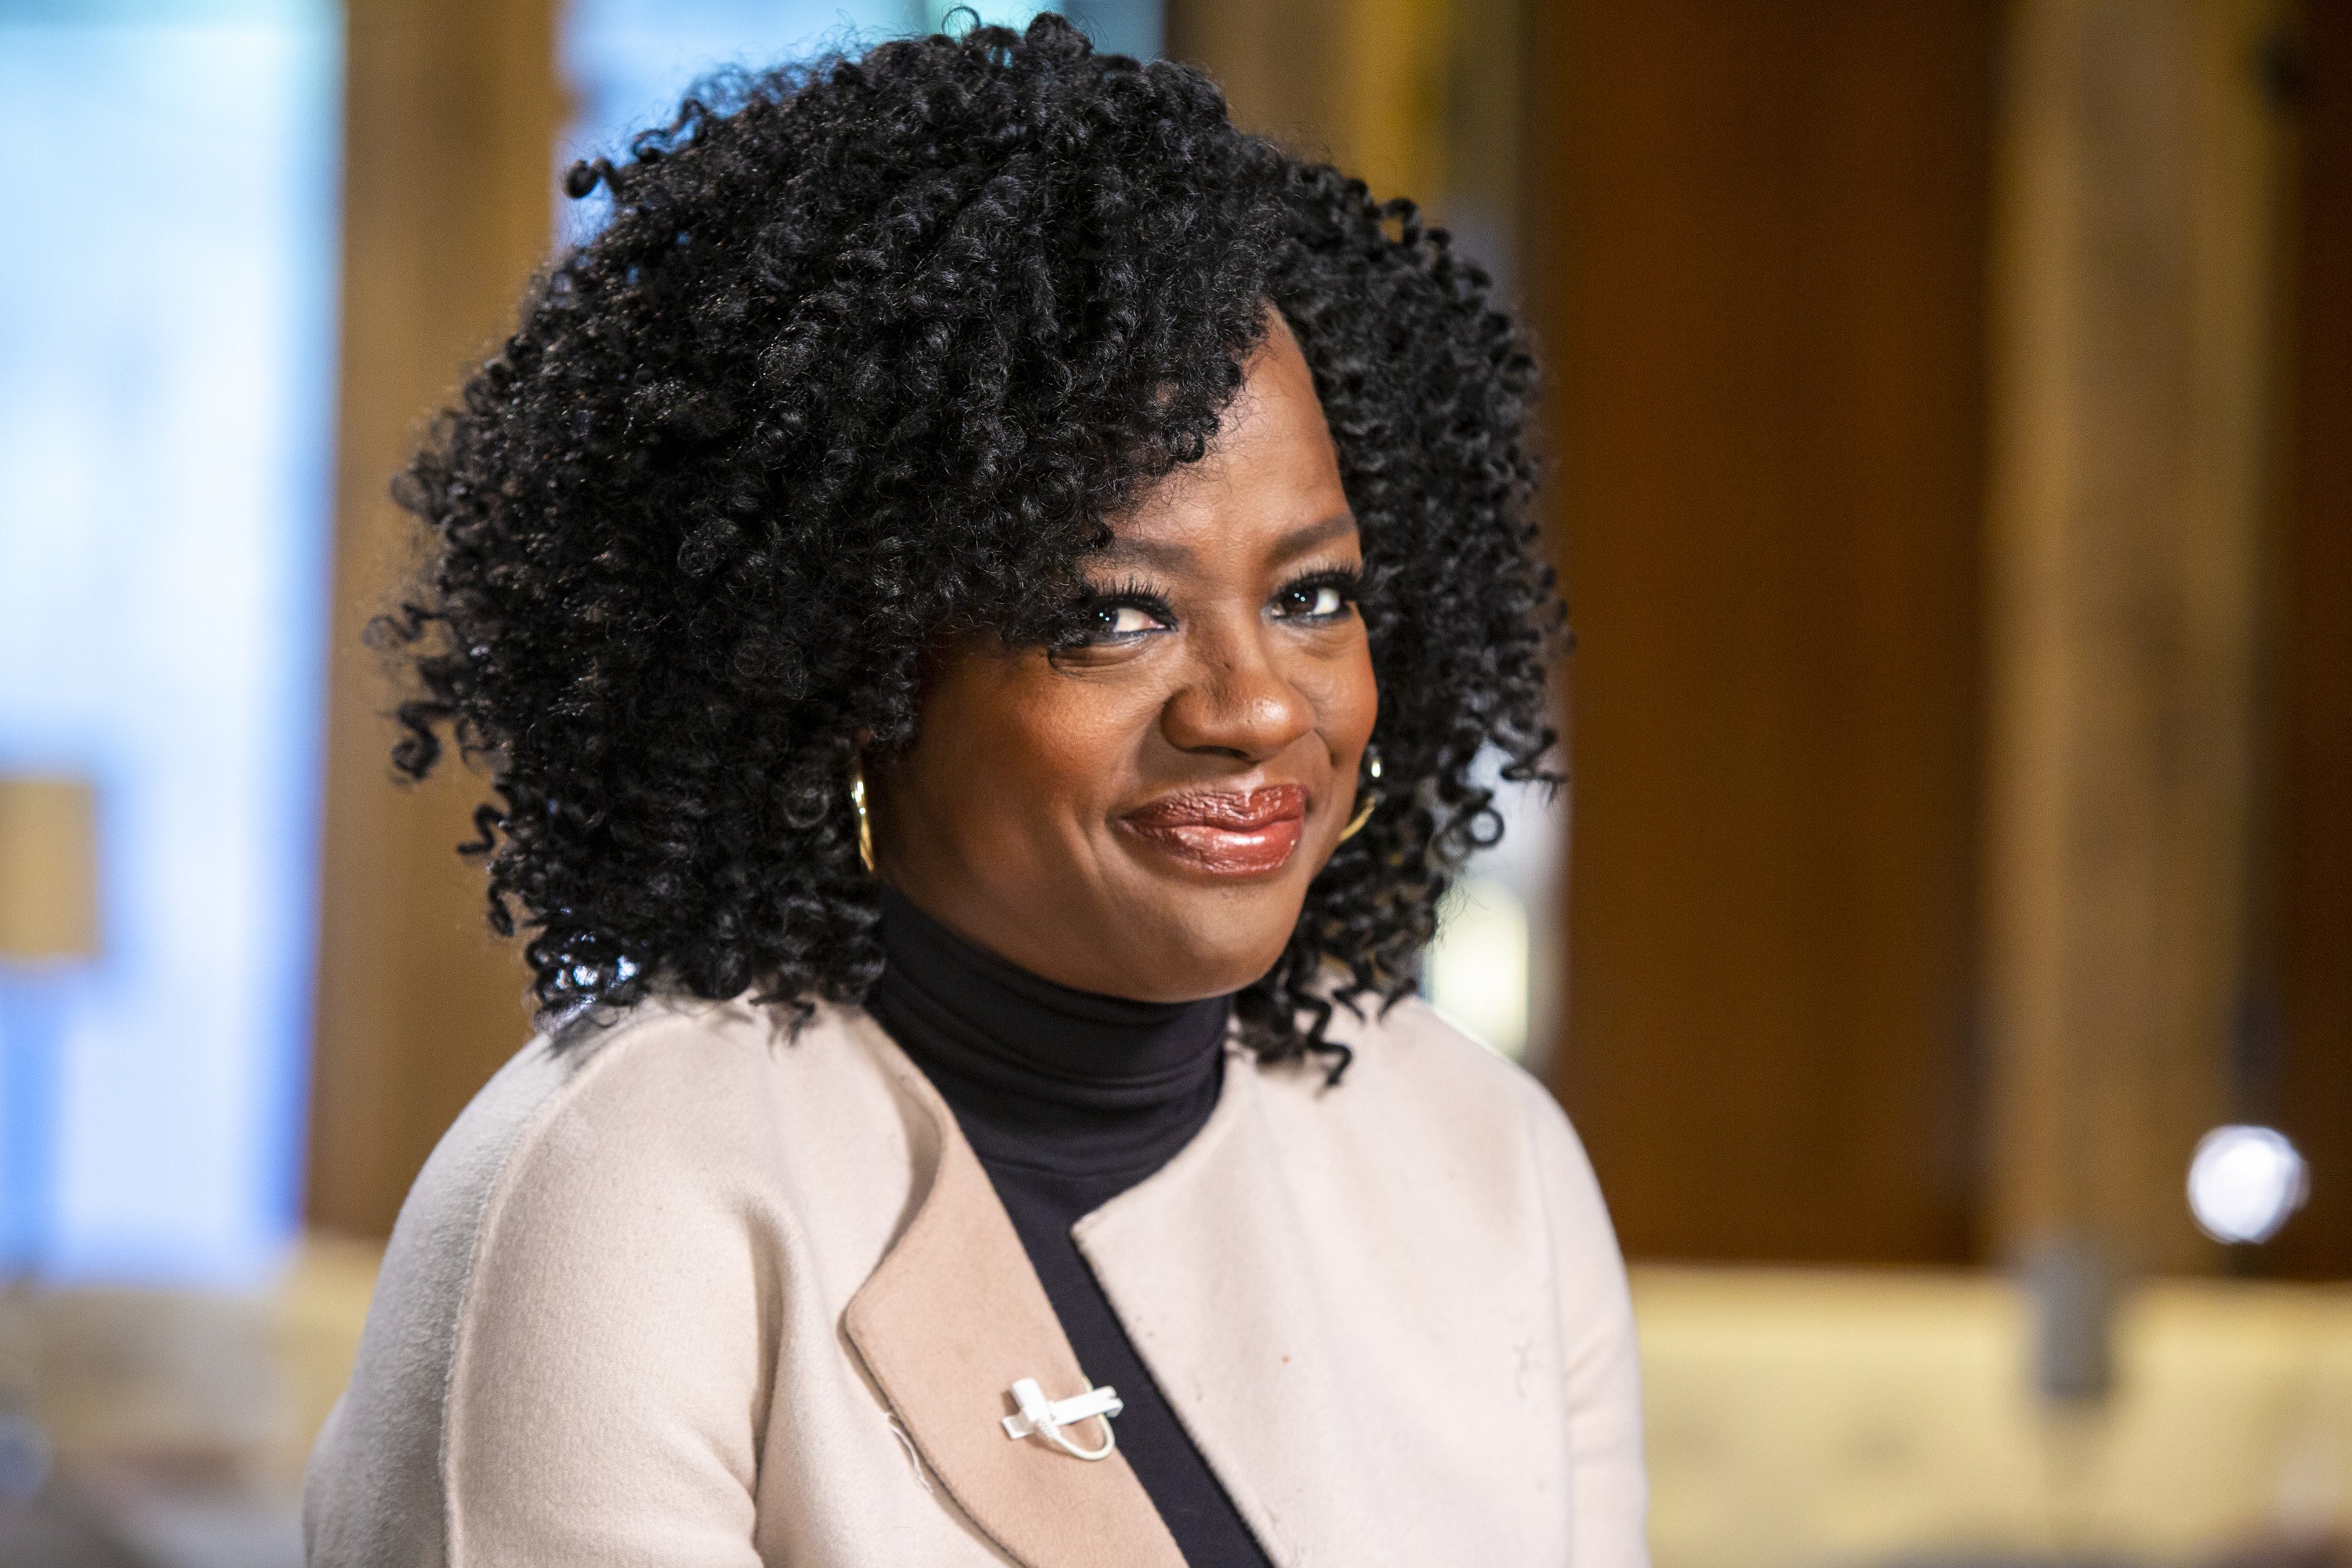 Viola Davis on season 3 of "Sunday Today with Willie Geist" on May 5, 2019. | Source: Mike Smith/NBCU Photo Bank/NBCUniversal/Getty Images